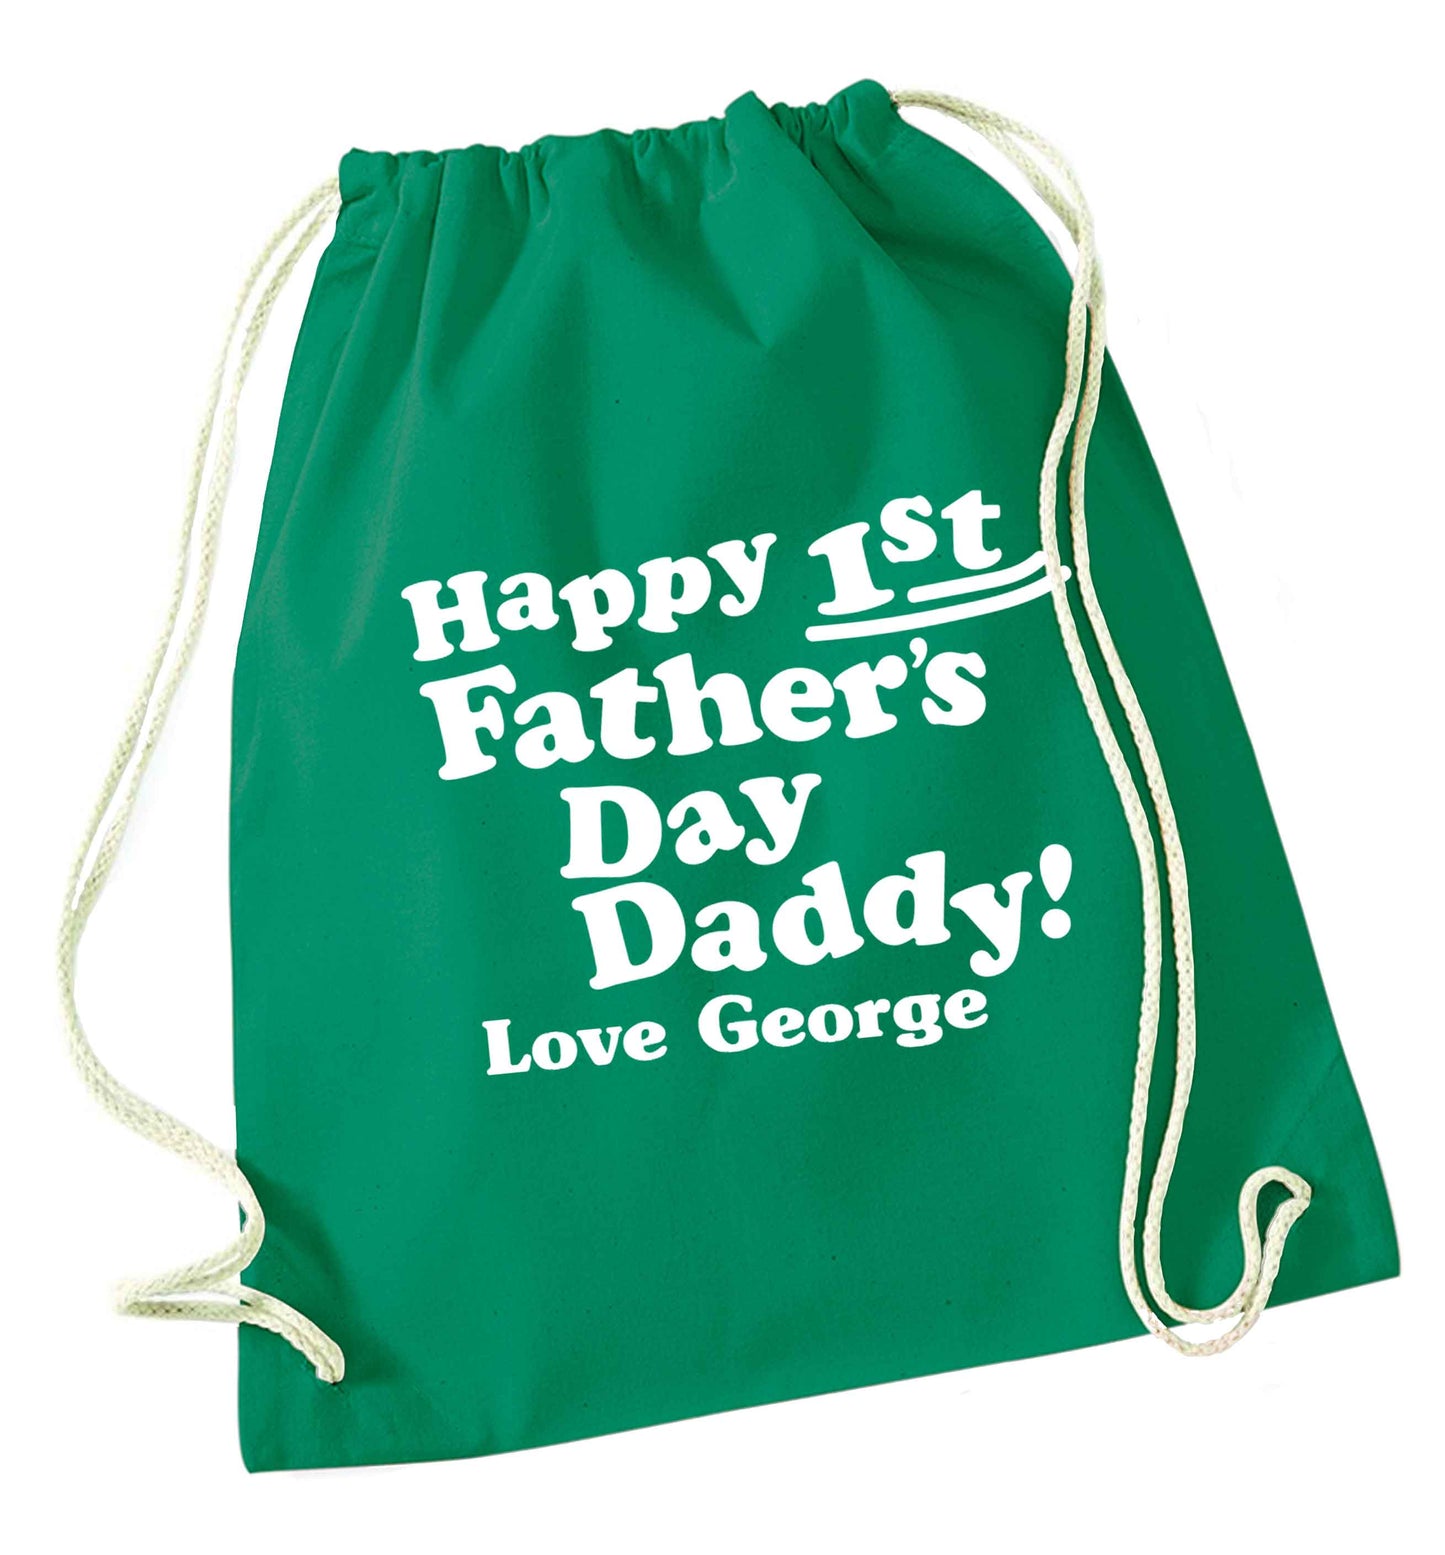 Happy first Fathers Day daddy love personalised green drawstring bag